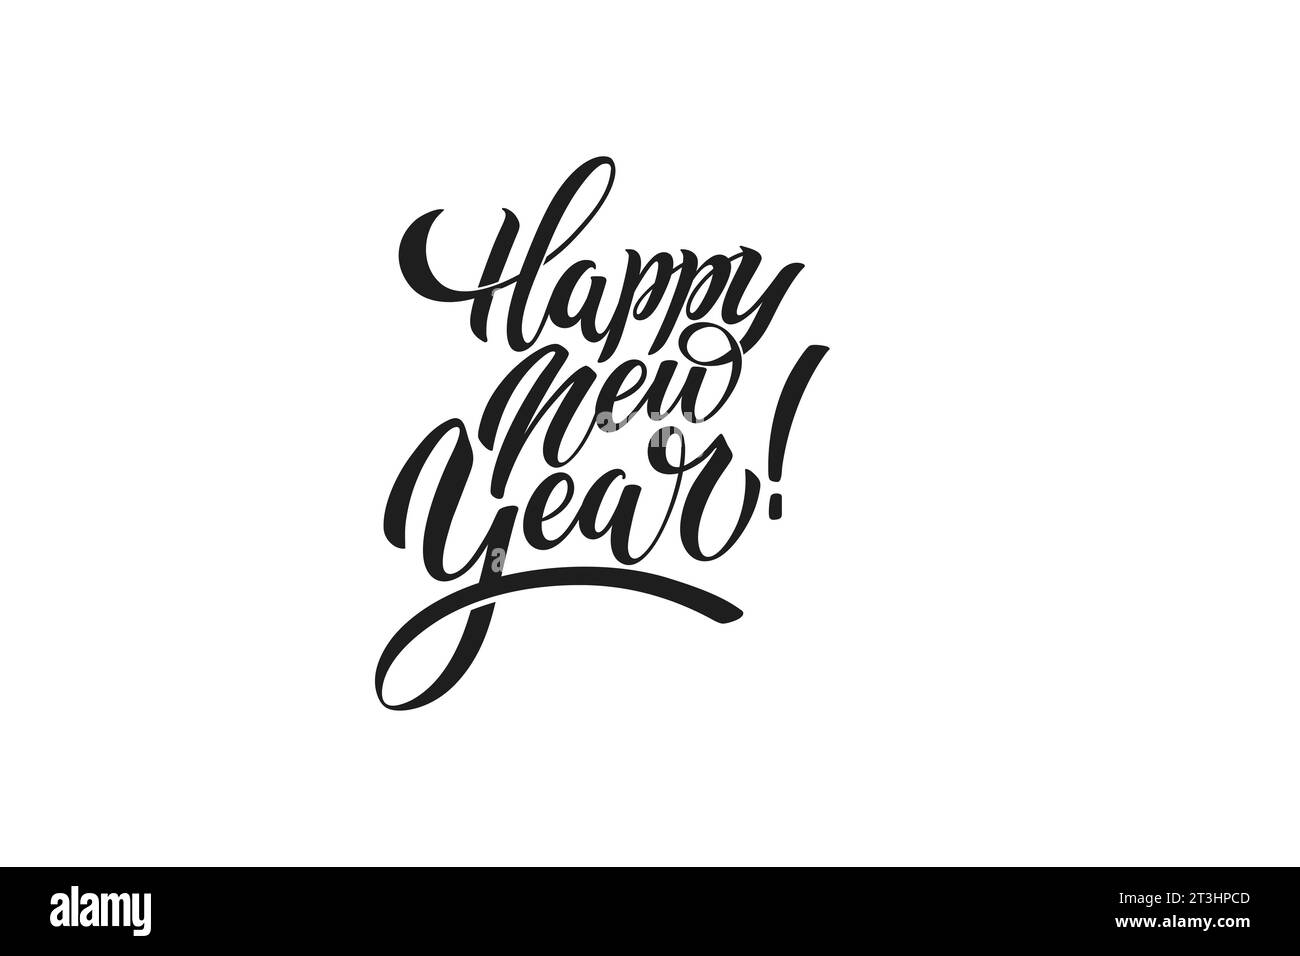 Happy New Year hand lettering calligraphy. Vector holiday illustration element. Typographic element for banner, poster, congratulations. Stock Vector